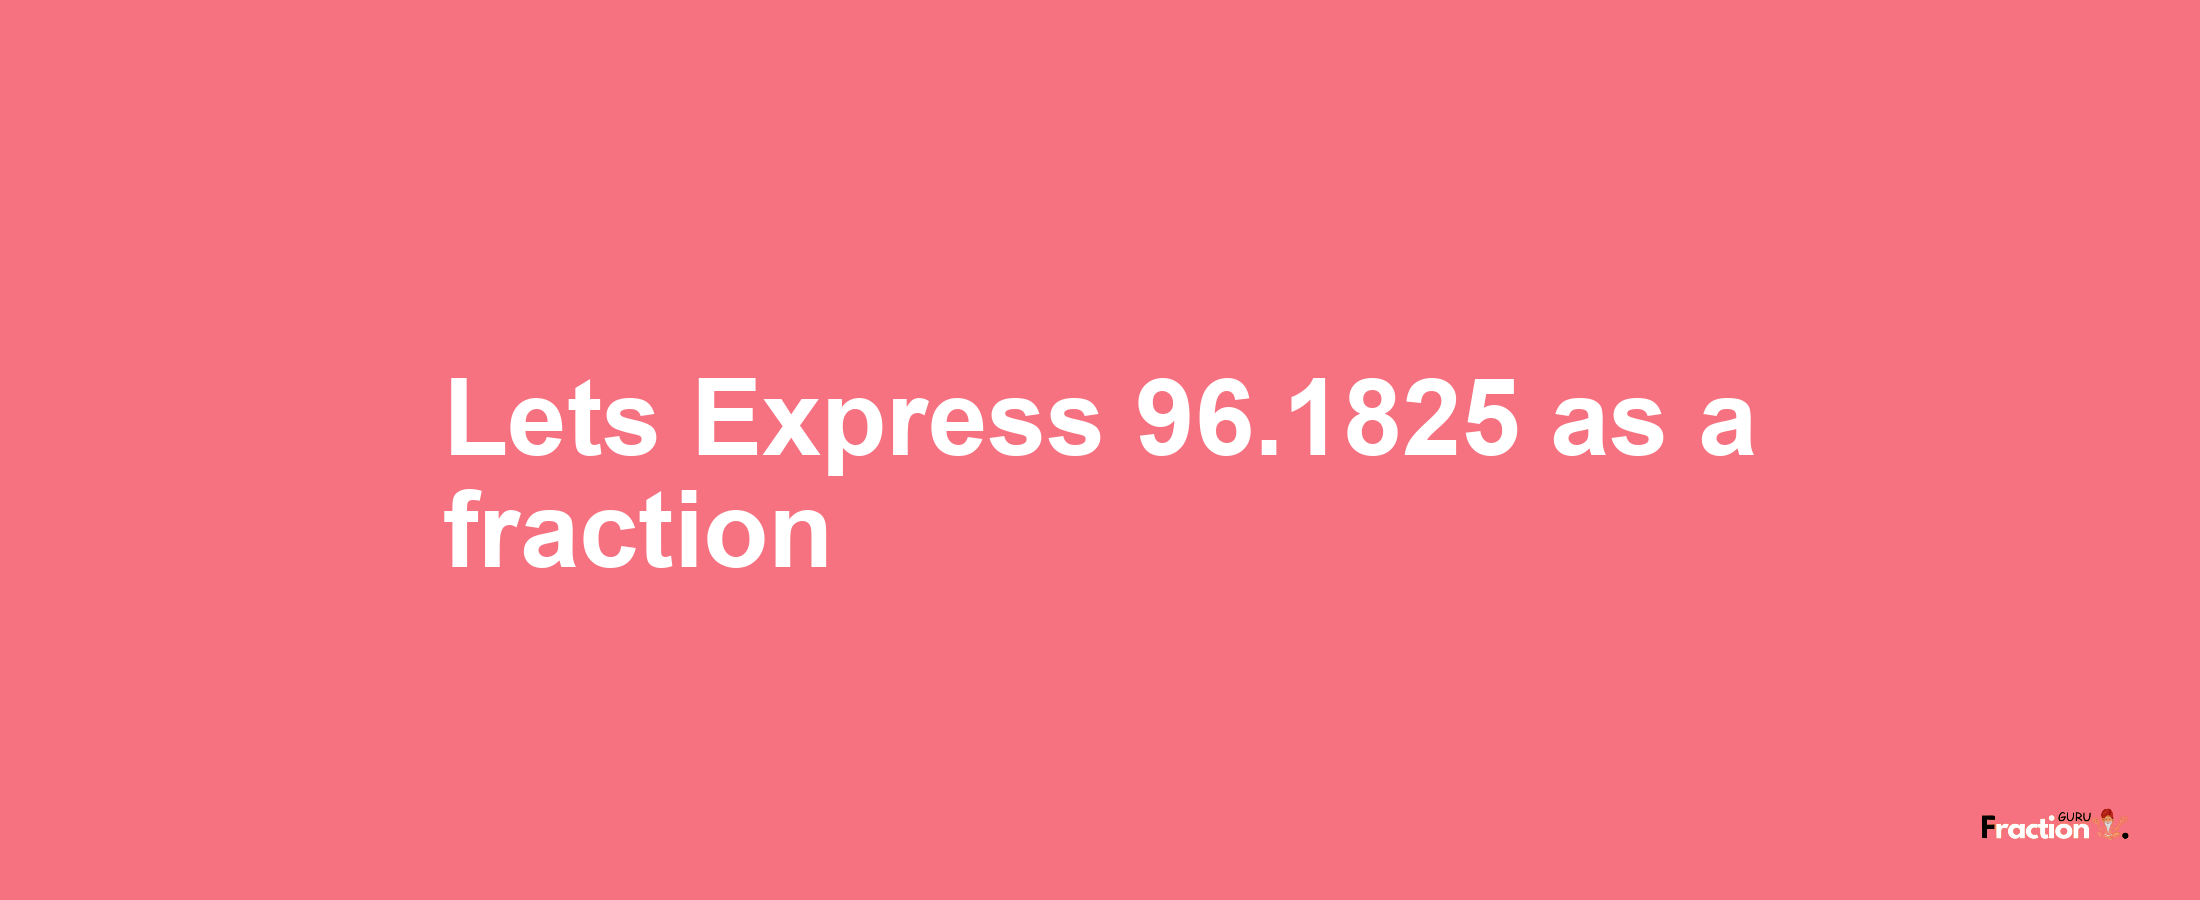 Lets Express 96.1825 as afraction